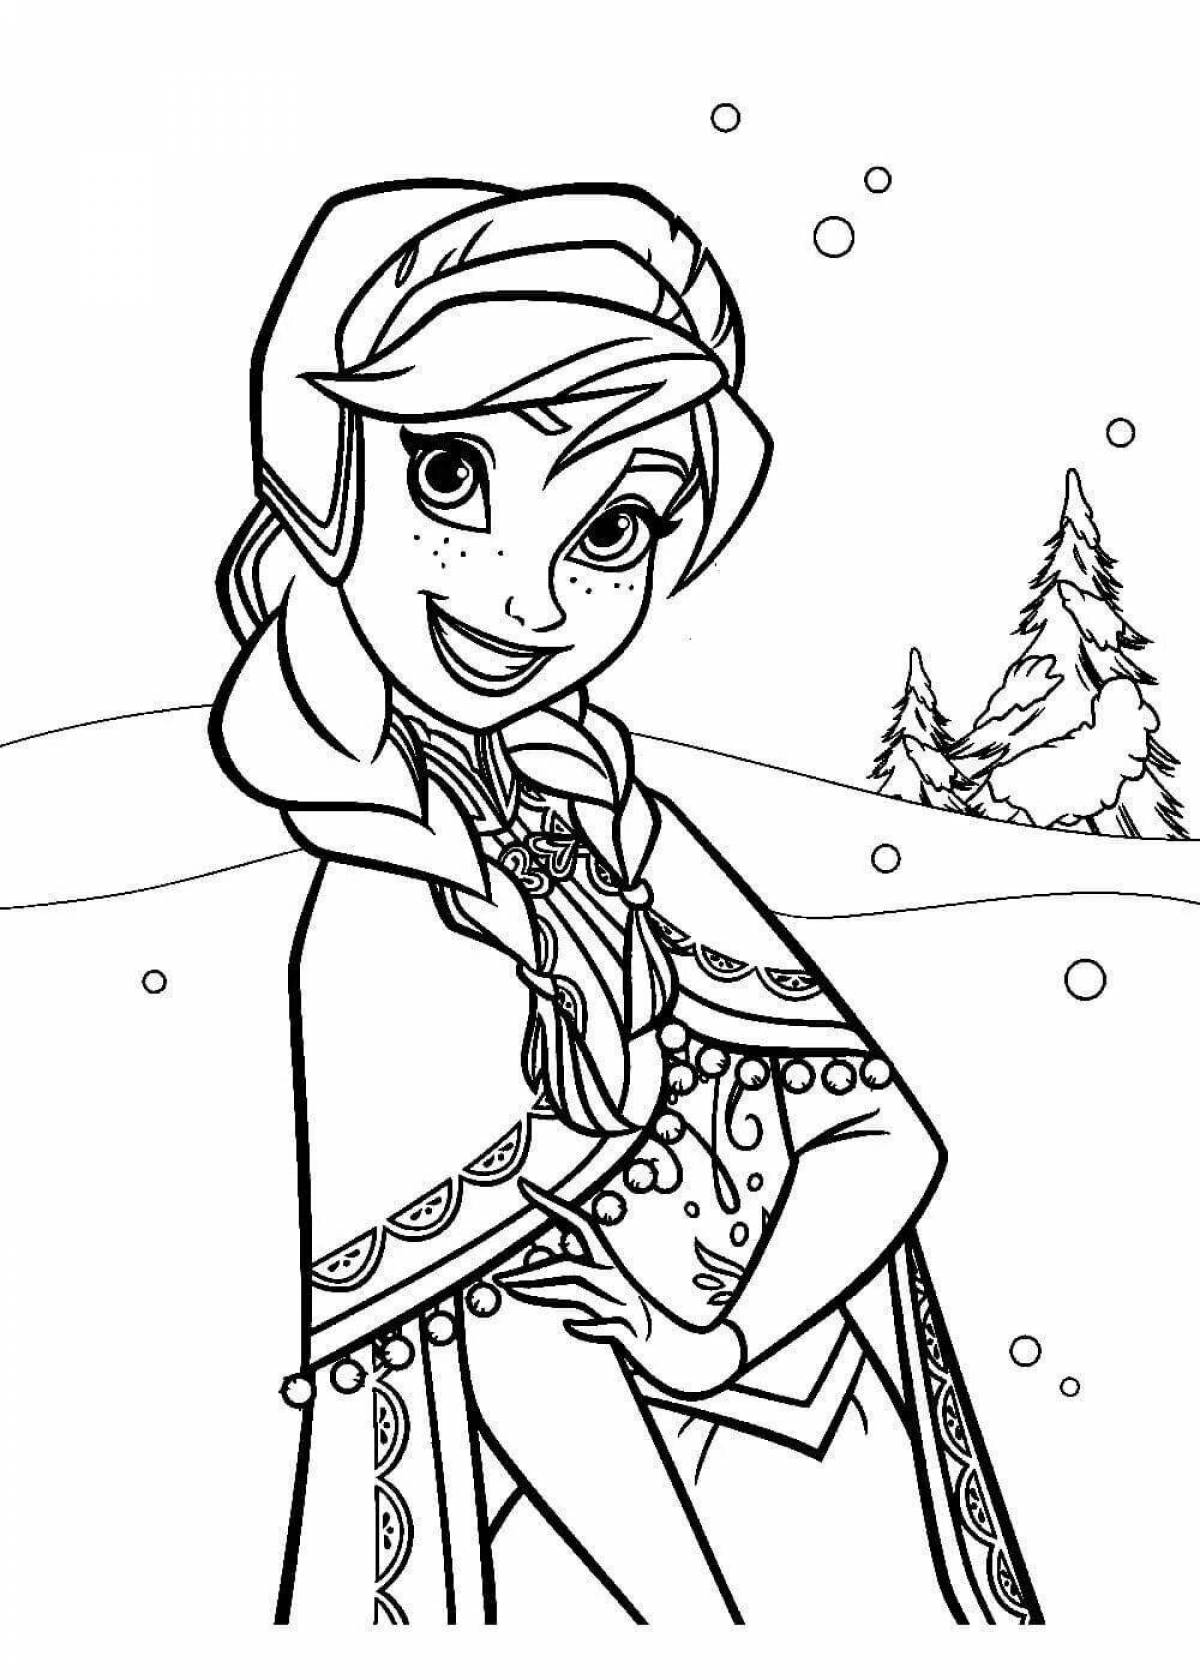 Elsa glitter coloring book for kids 5-6 years old